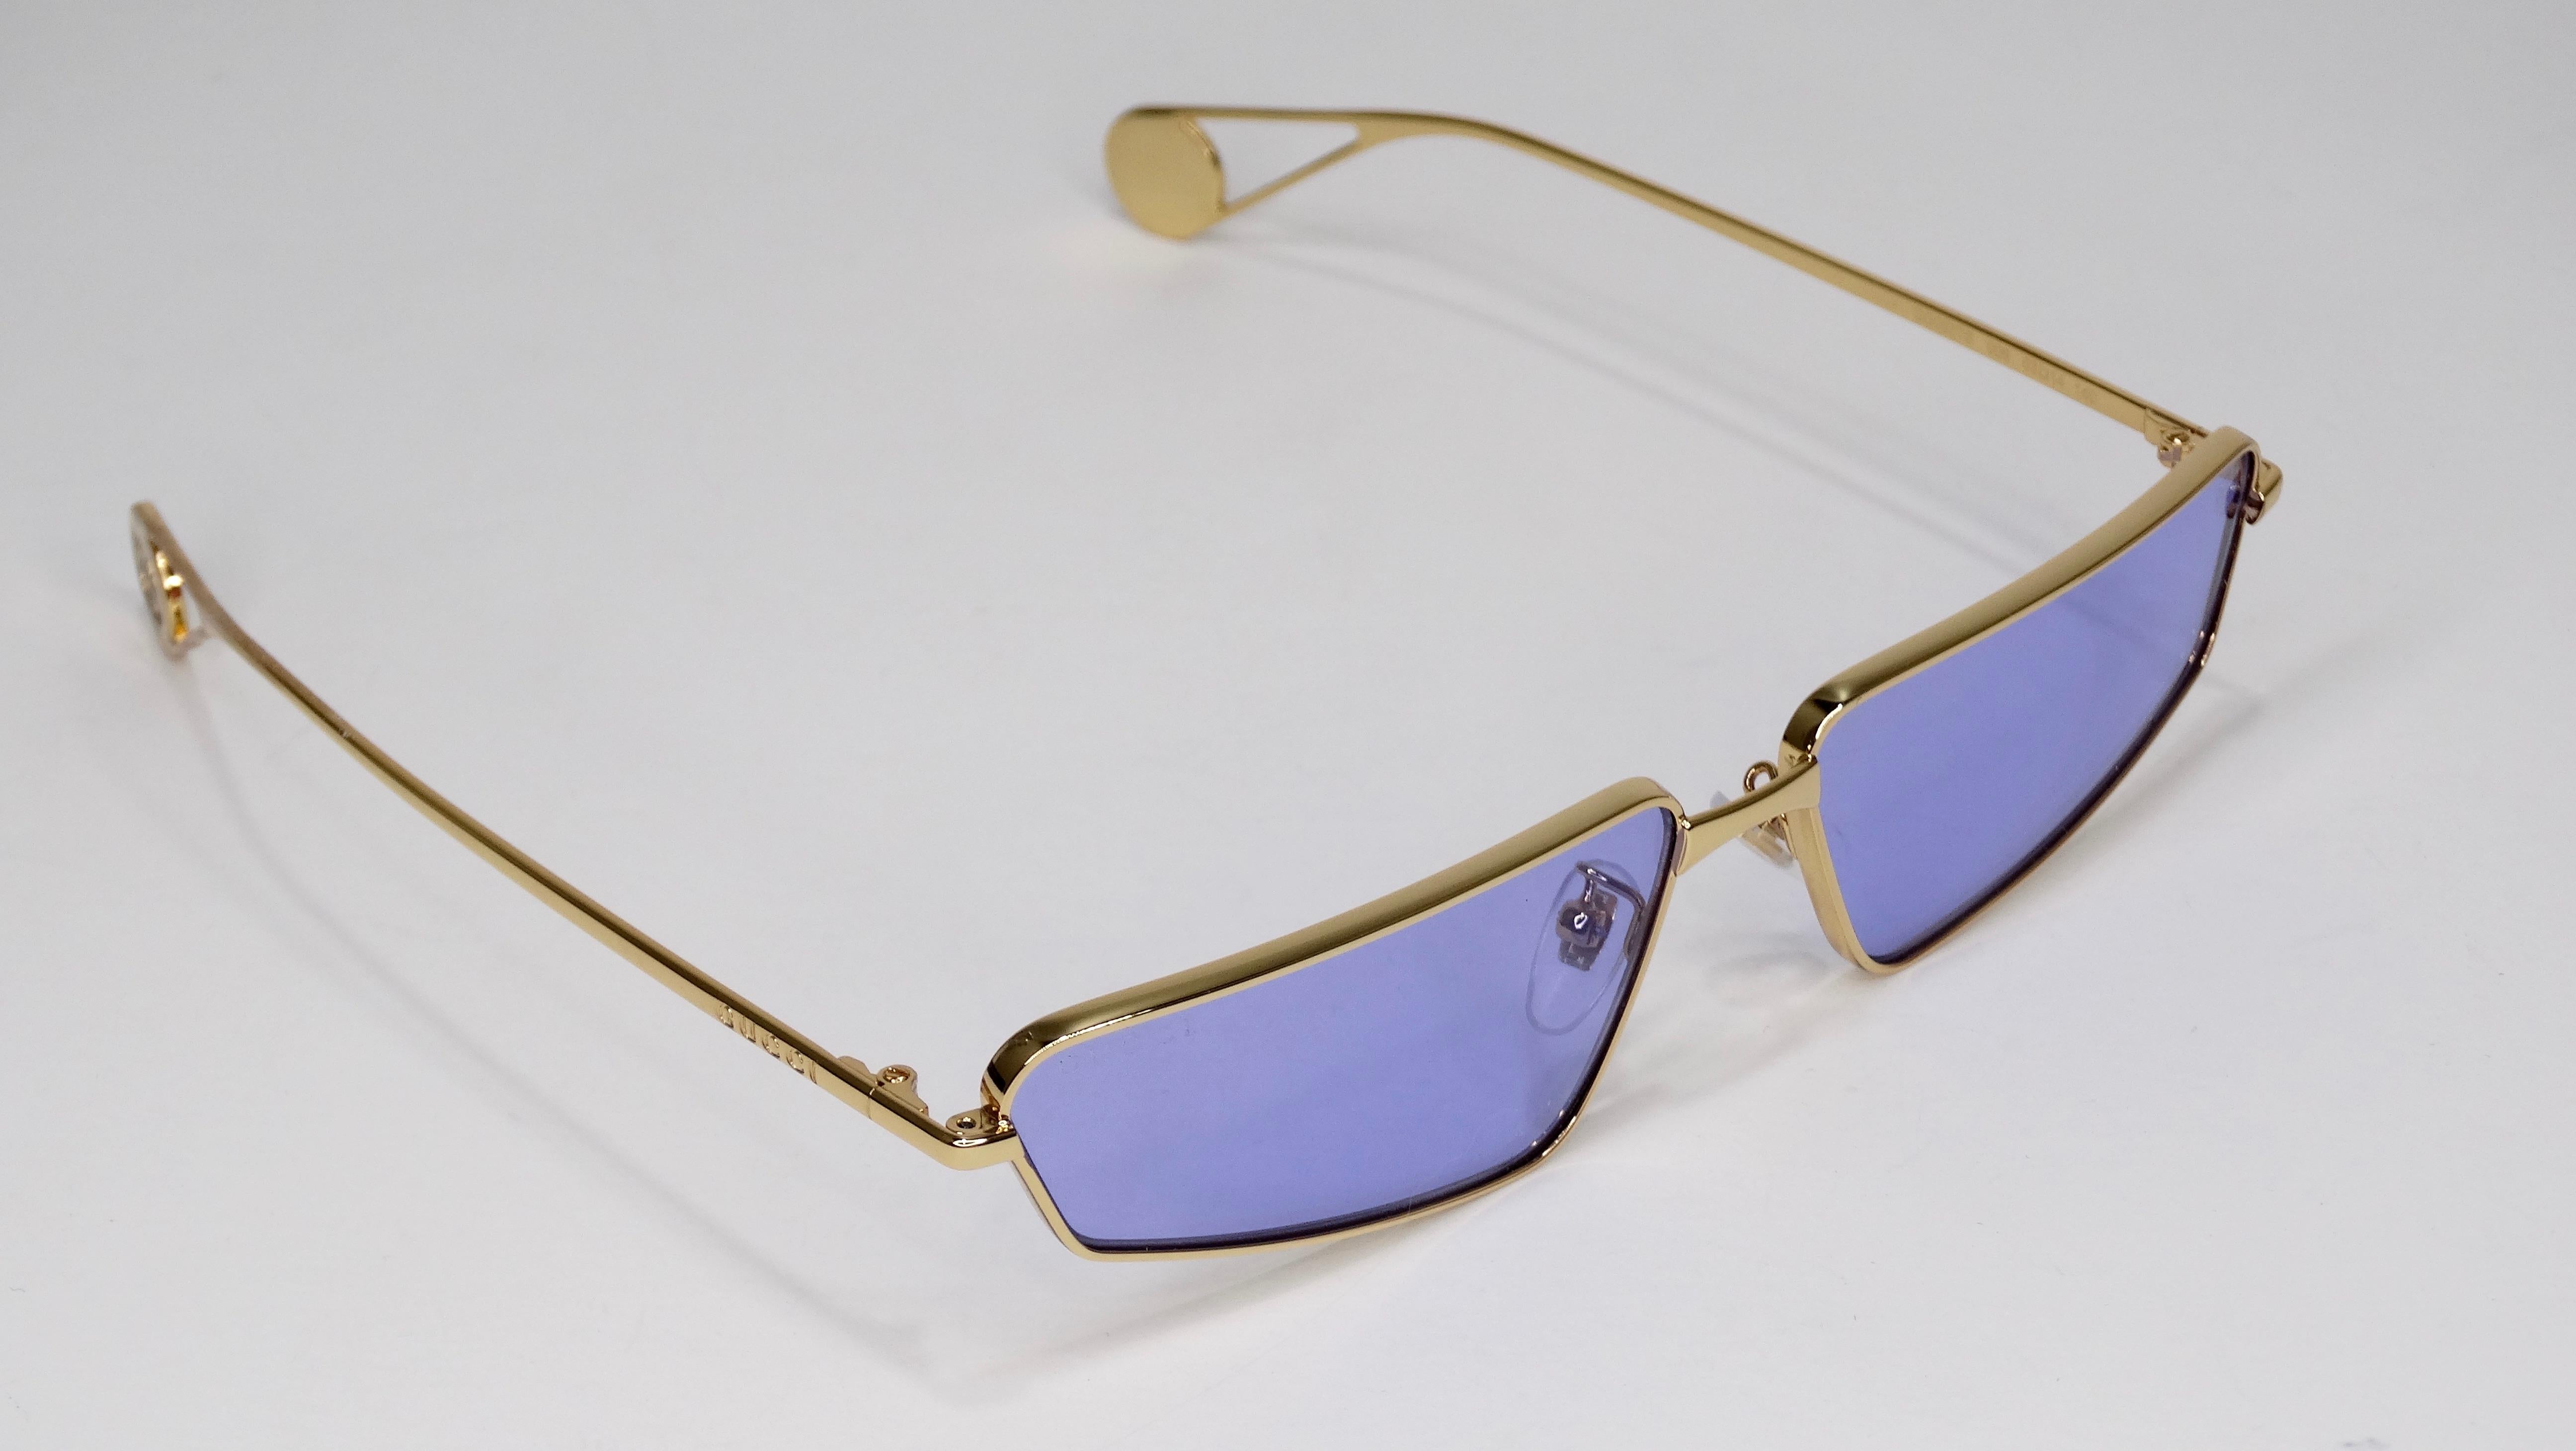 Gucci Blue Cat Eye Sunglasses In Excellent Condition For Sale In Scottsdale, AZ